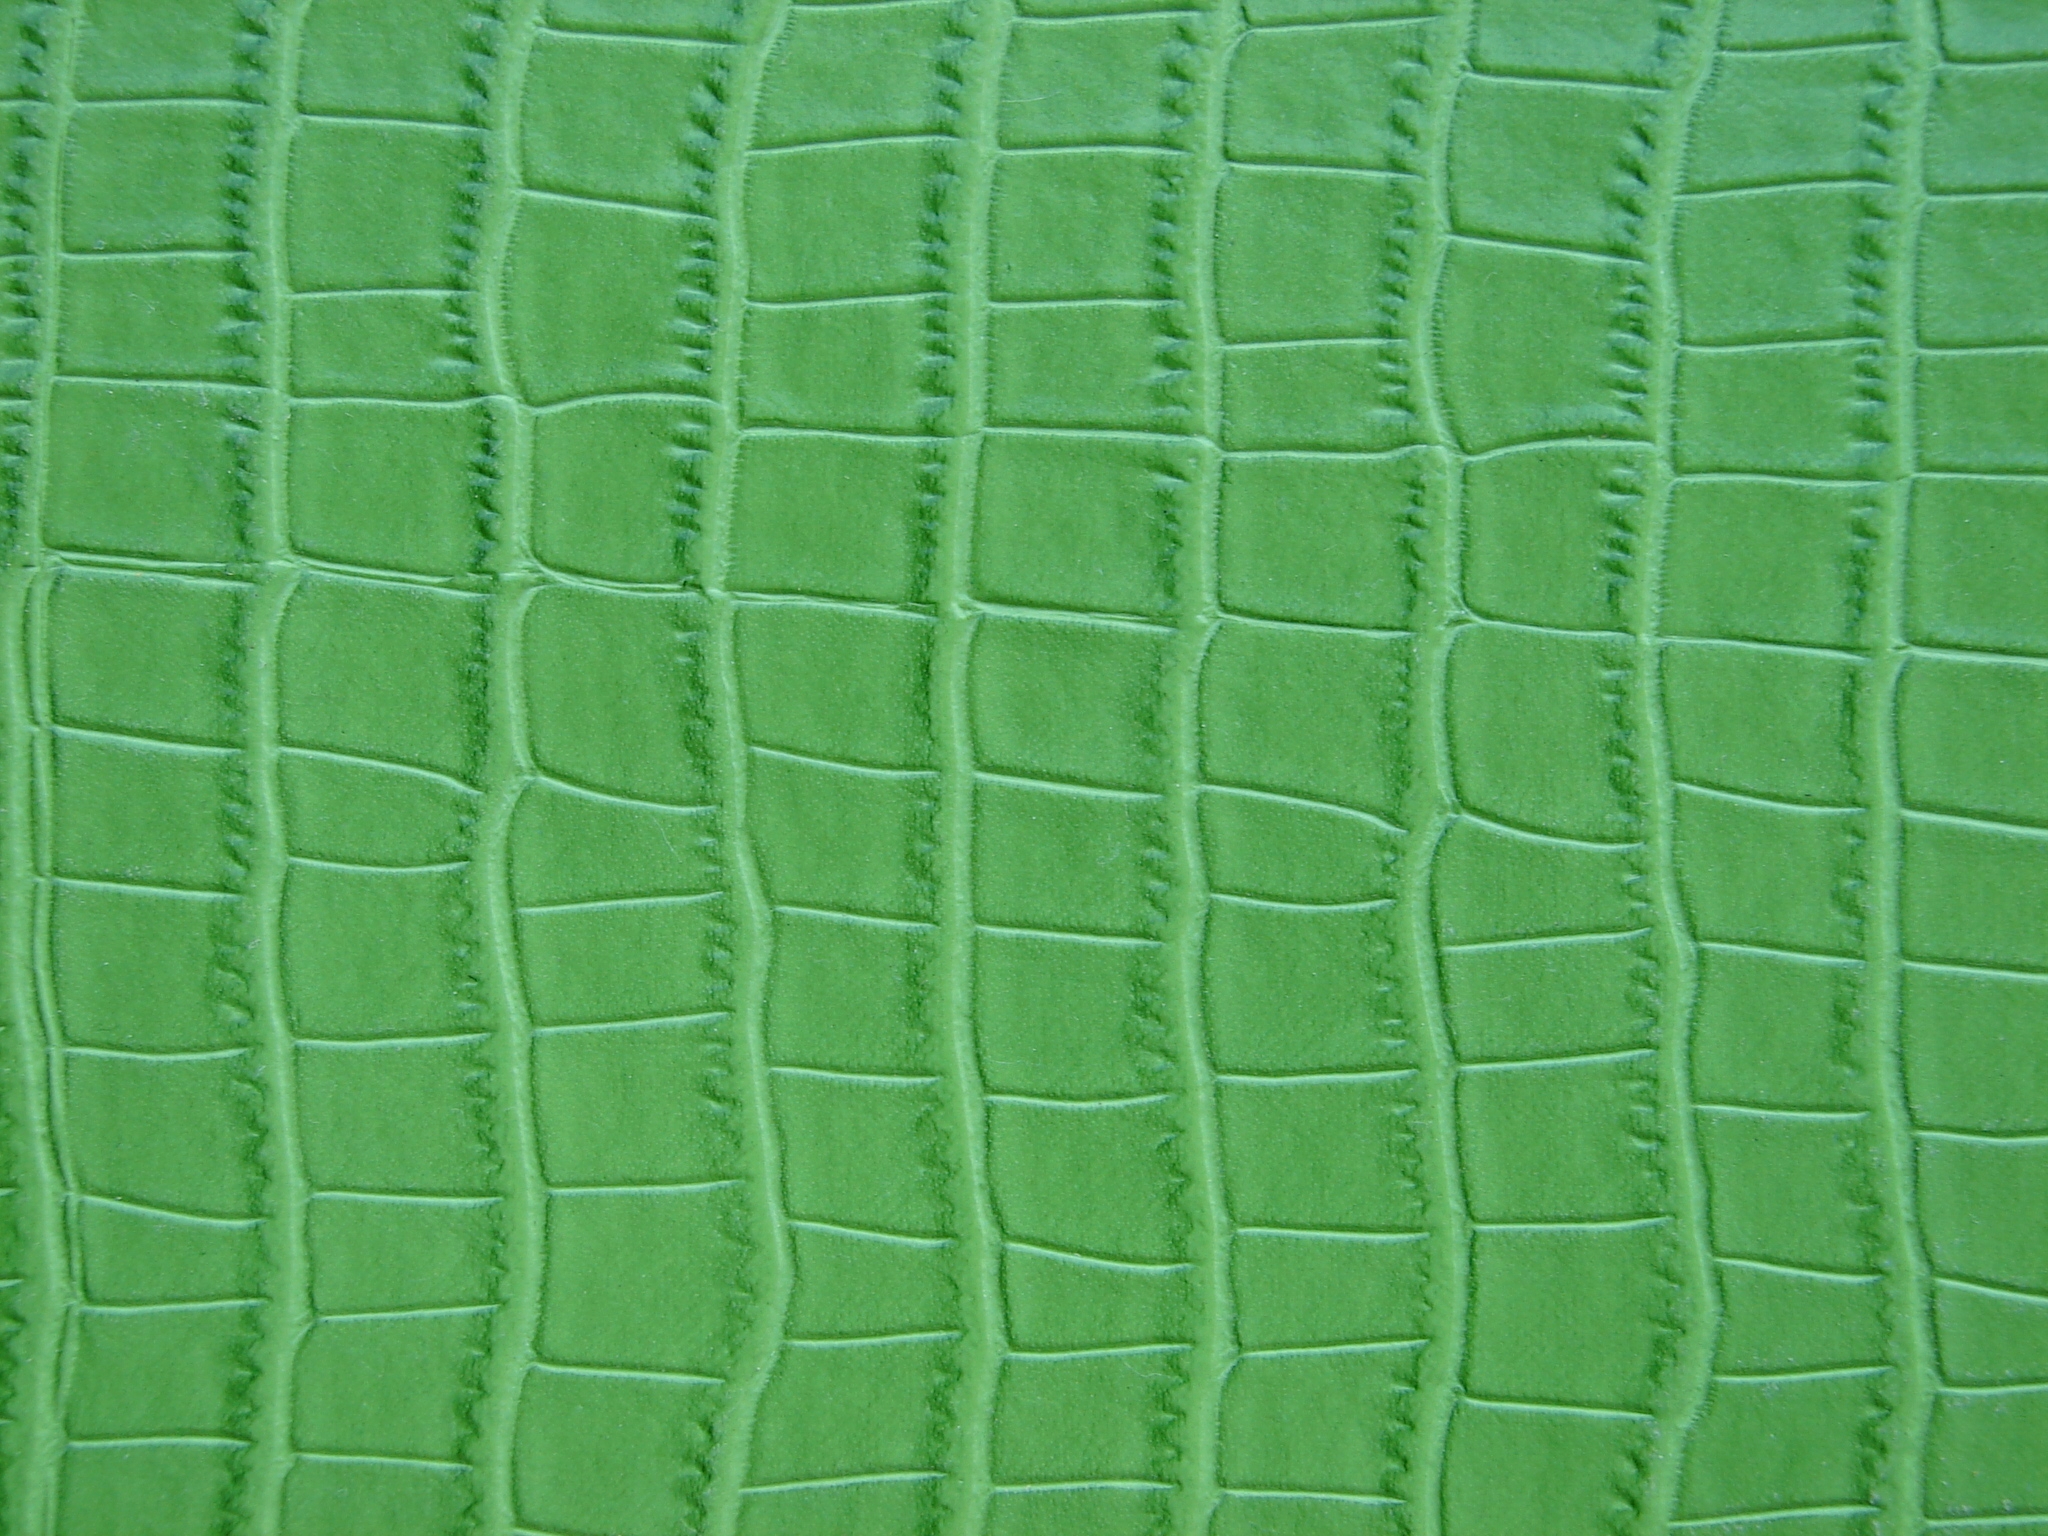 green reptile leather, download photo, green leather reptile, texture, background